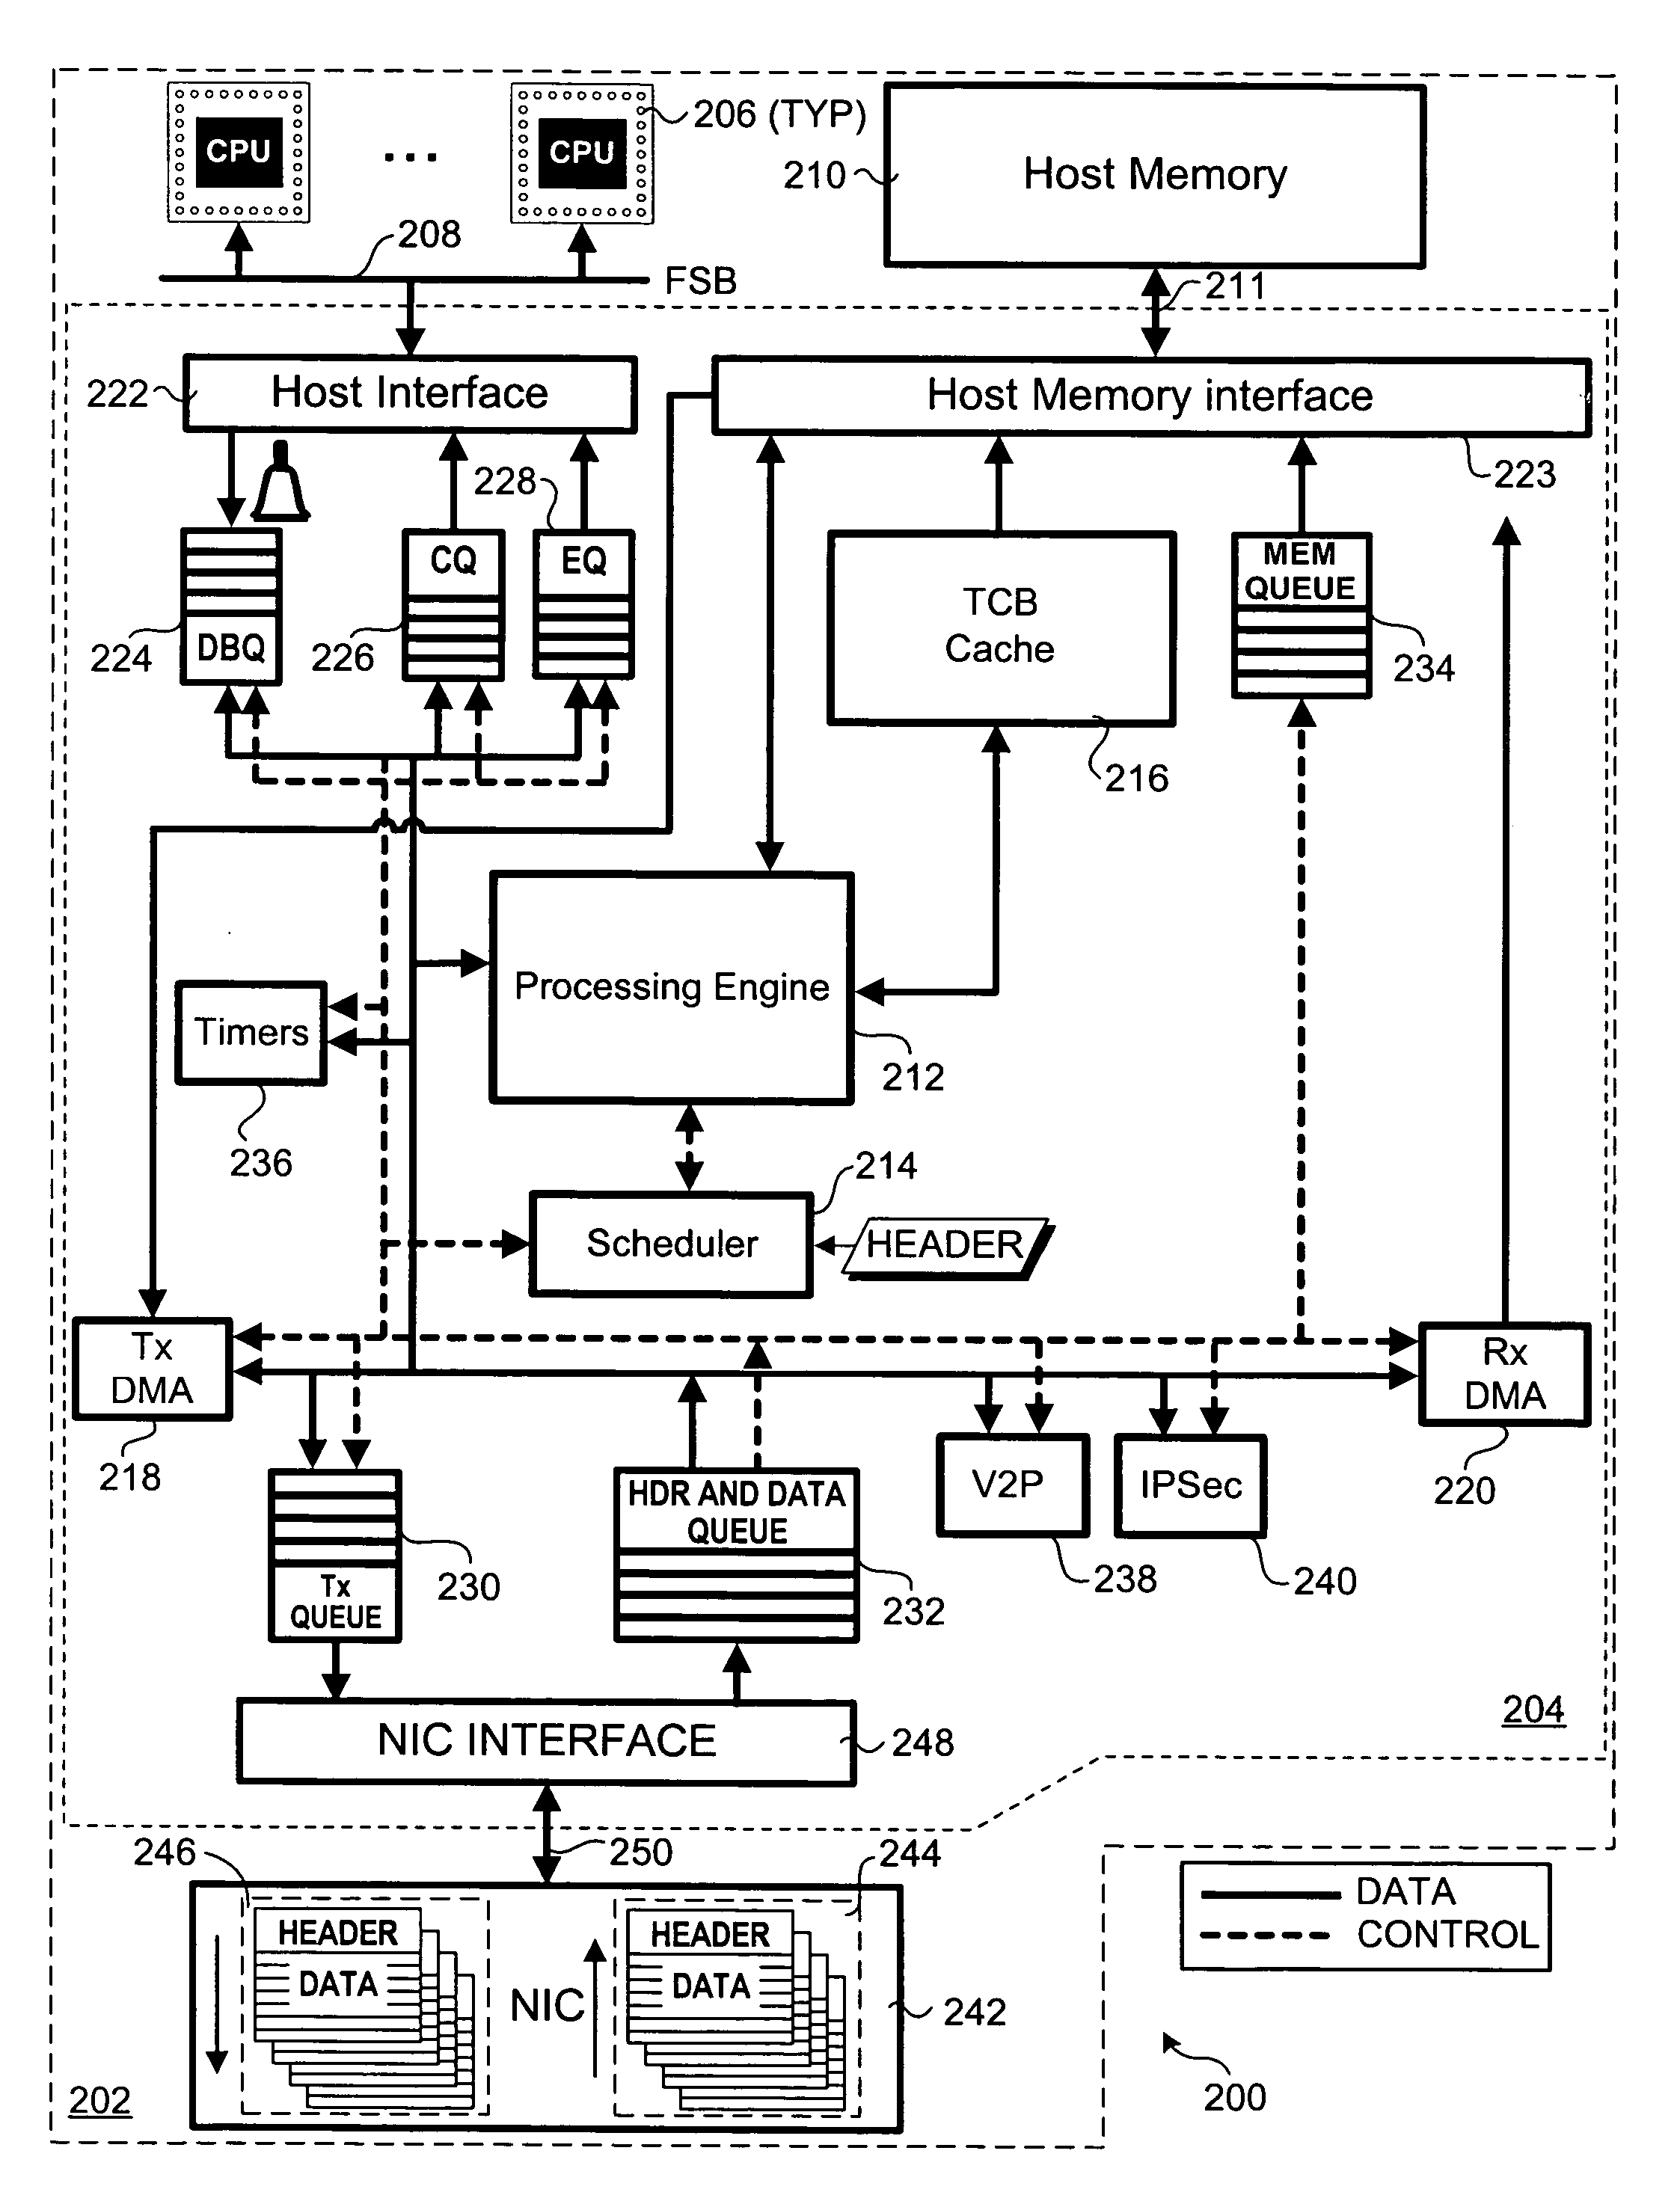 Hardware-based multi-threading for packet processing